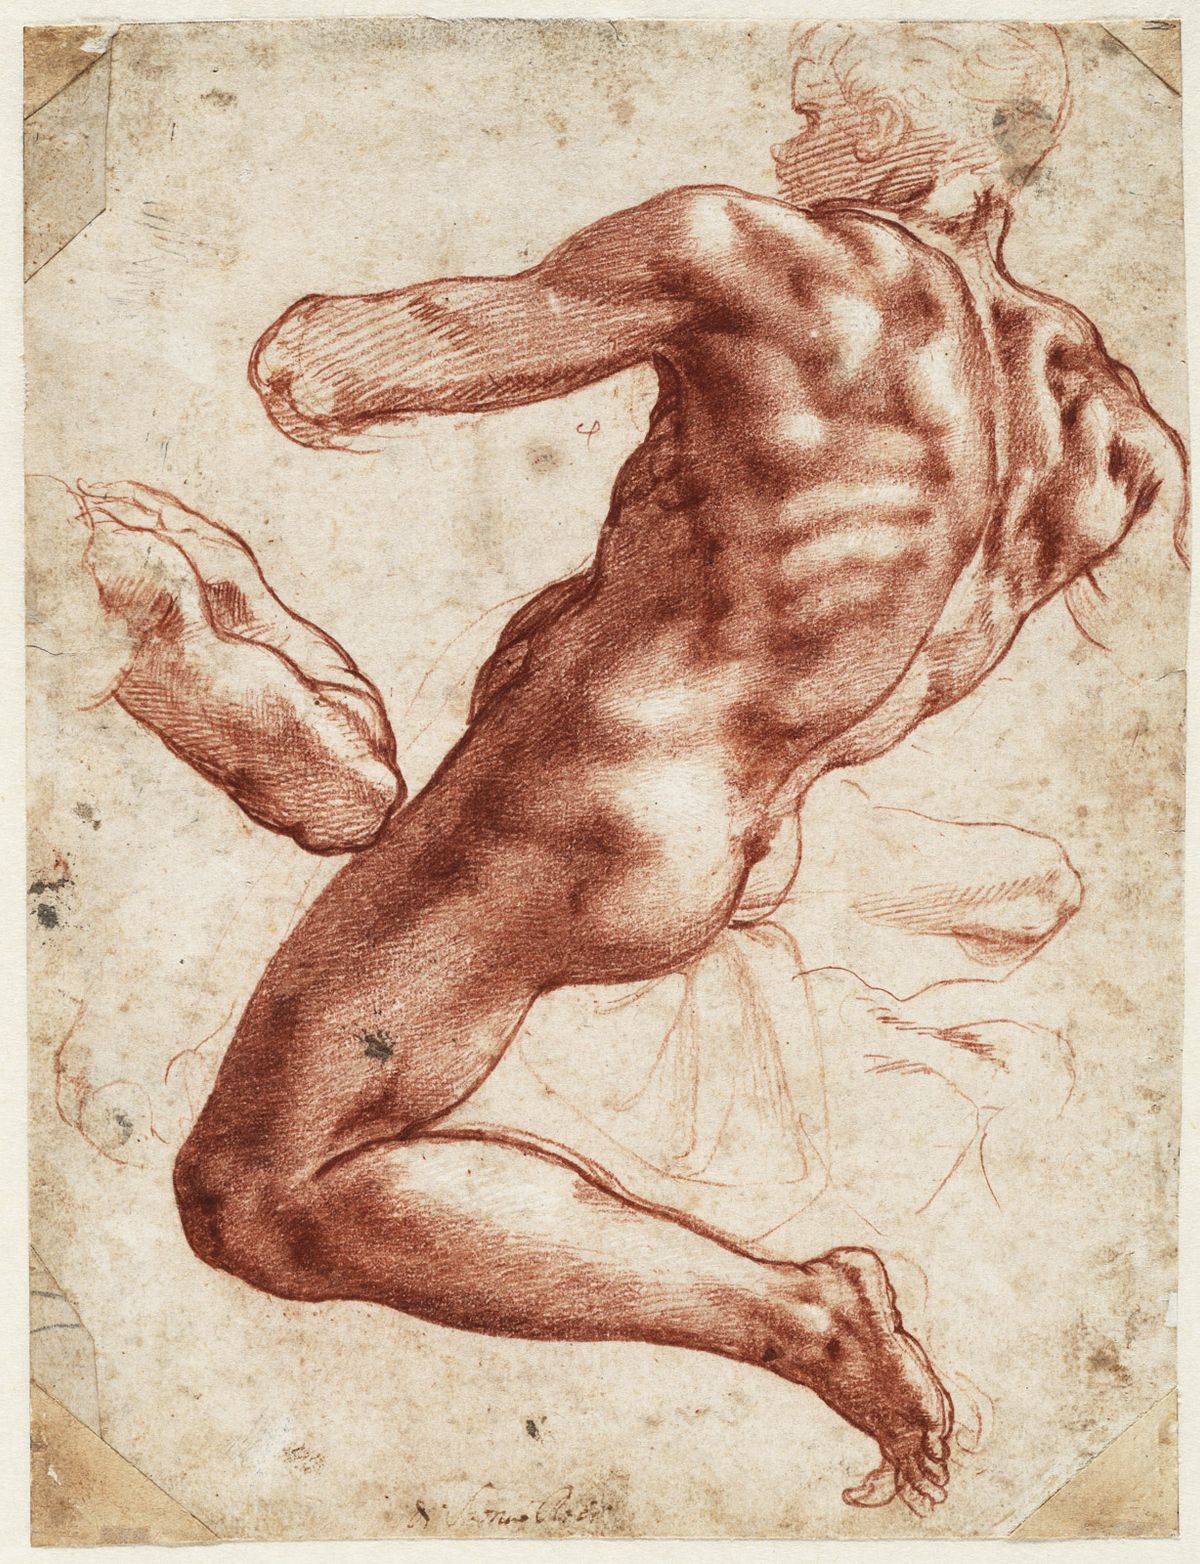 Seated Male Nude (1511) will be travelling to Cleveland and then Los Angeles from the Teylers Museum in Haarlem © Teylers Museum, Haarlem